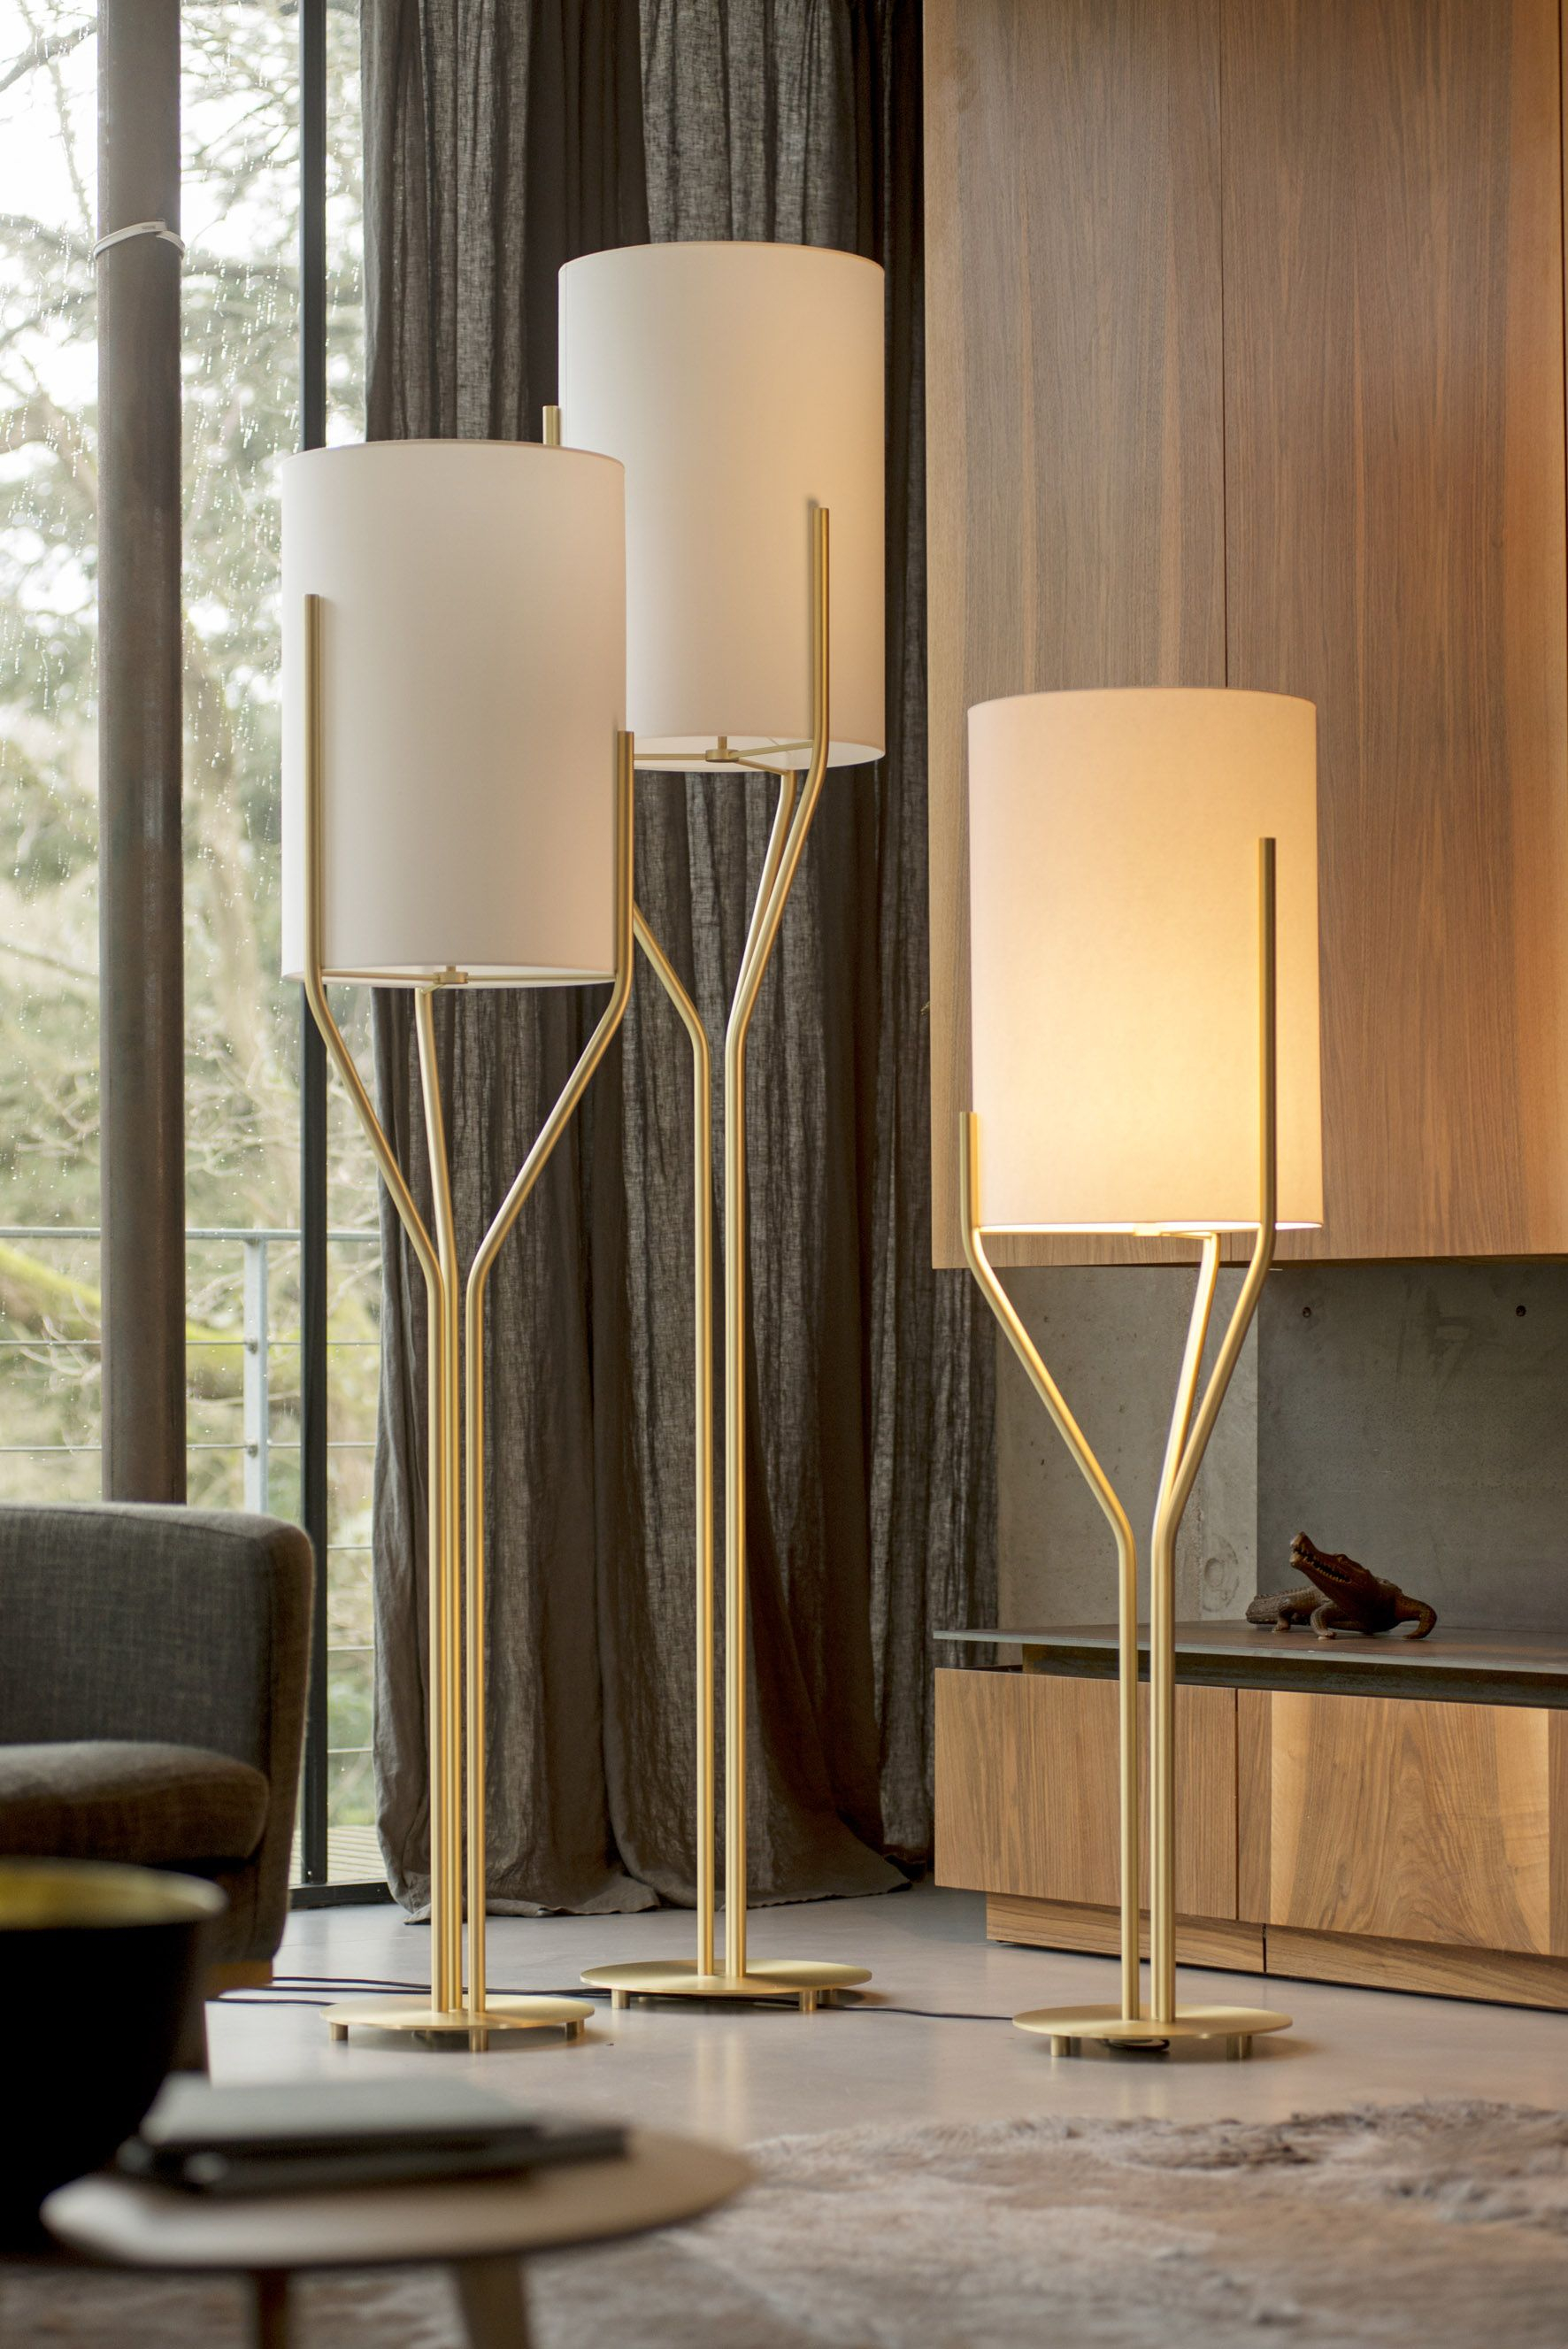 Best Floor Lamps For A Luxury Home Lighting Cool Floor within size 1772 X 2654